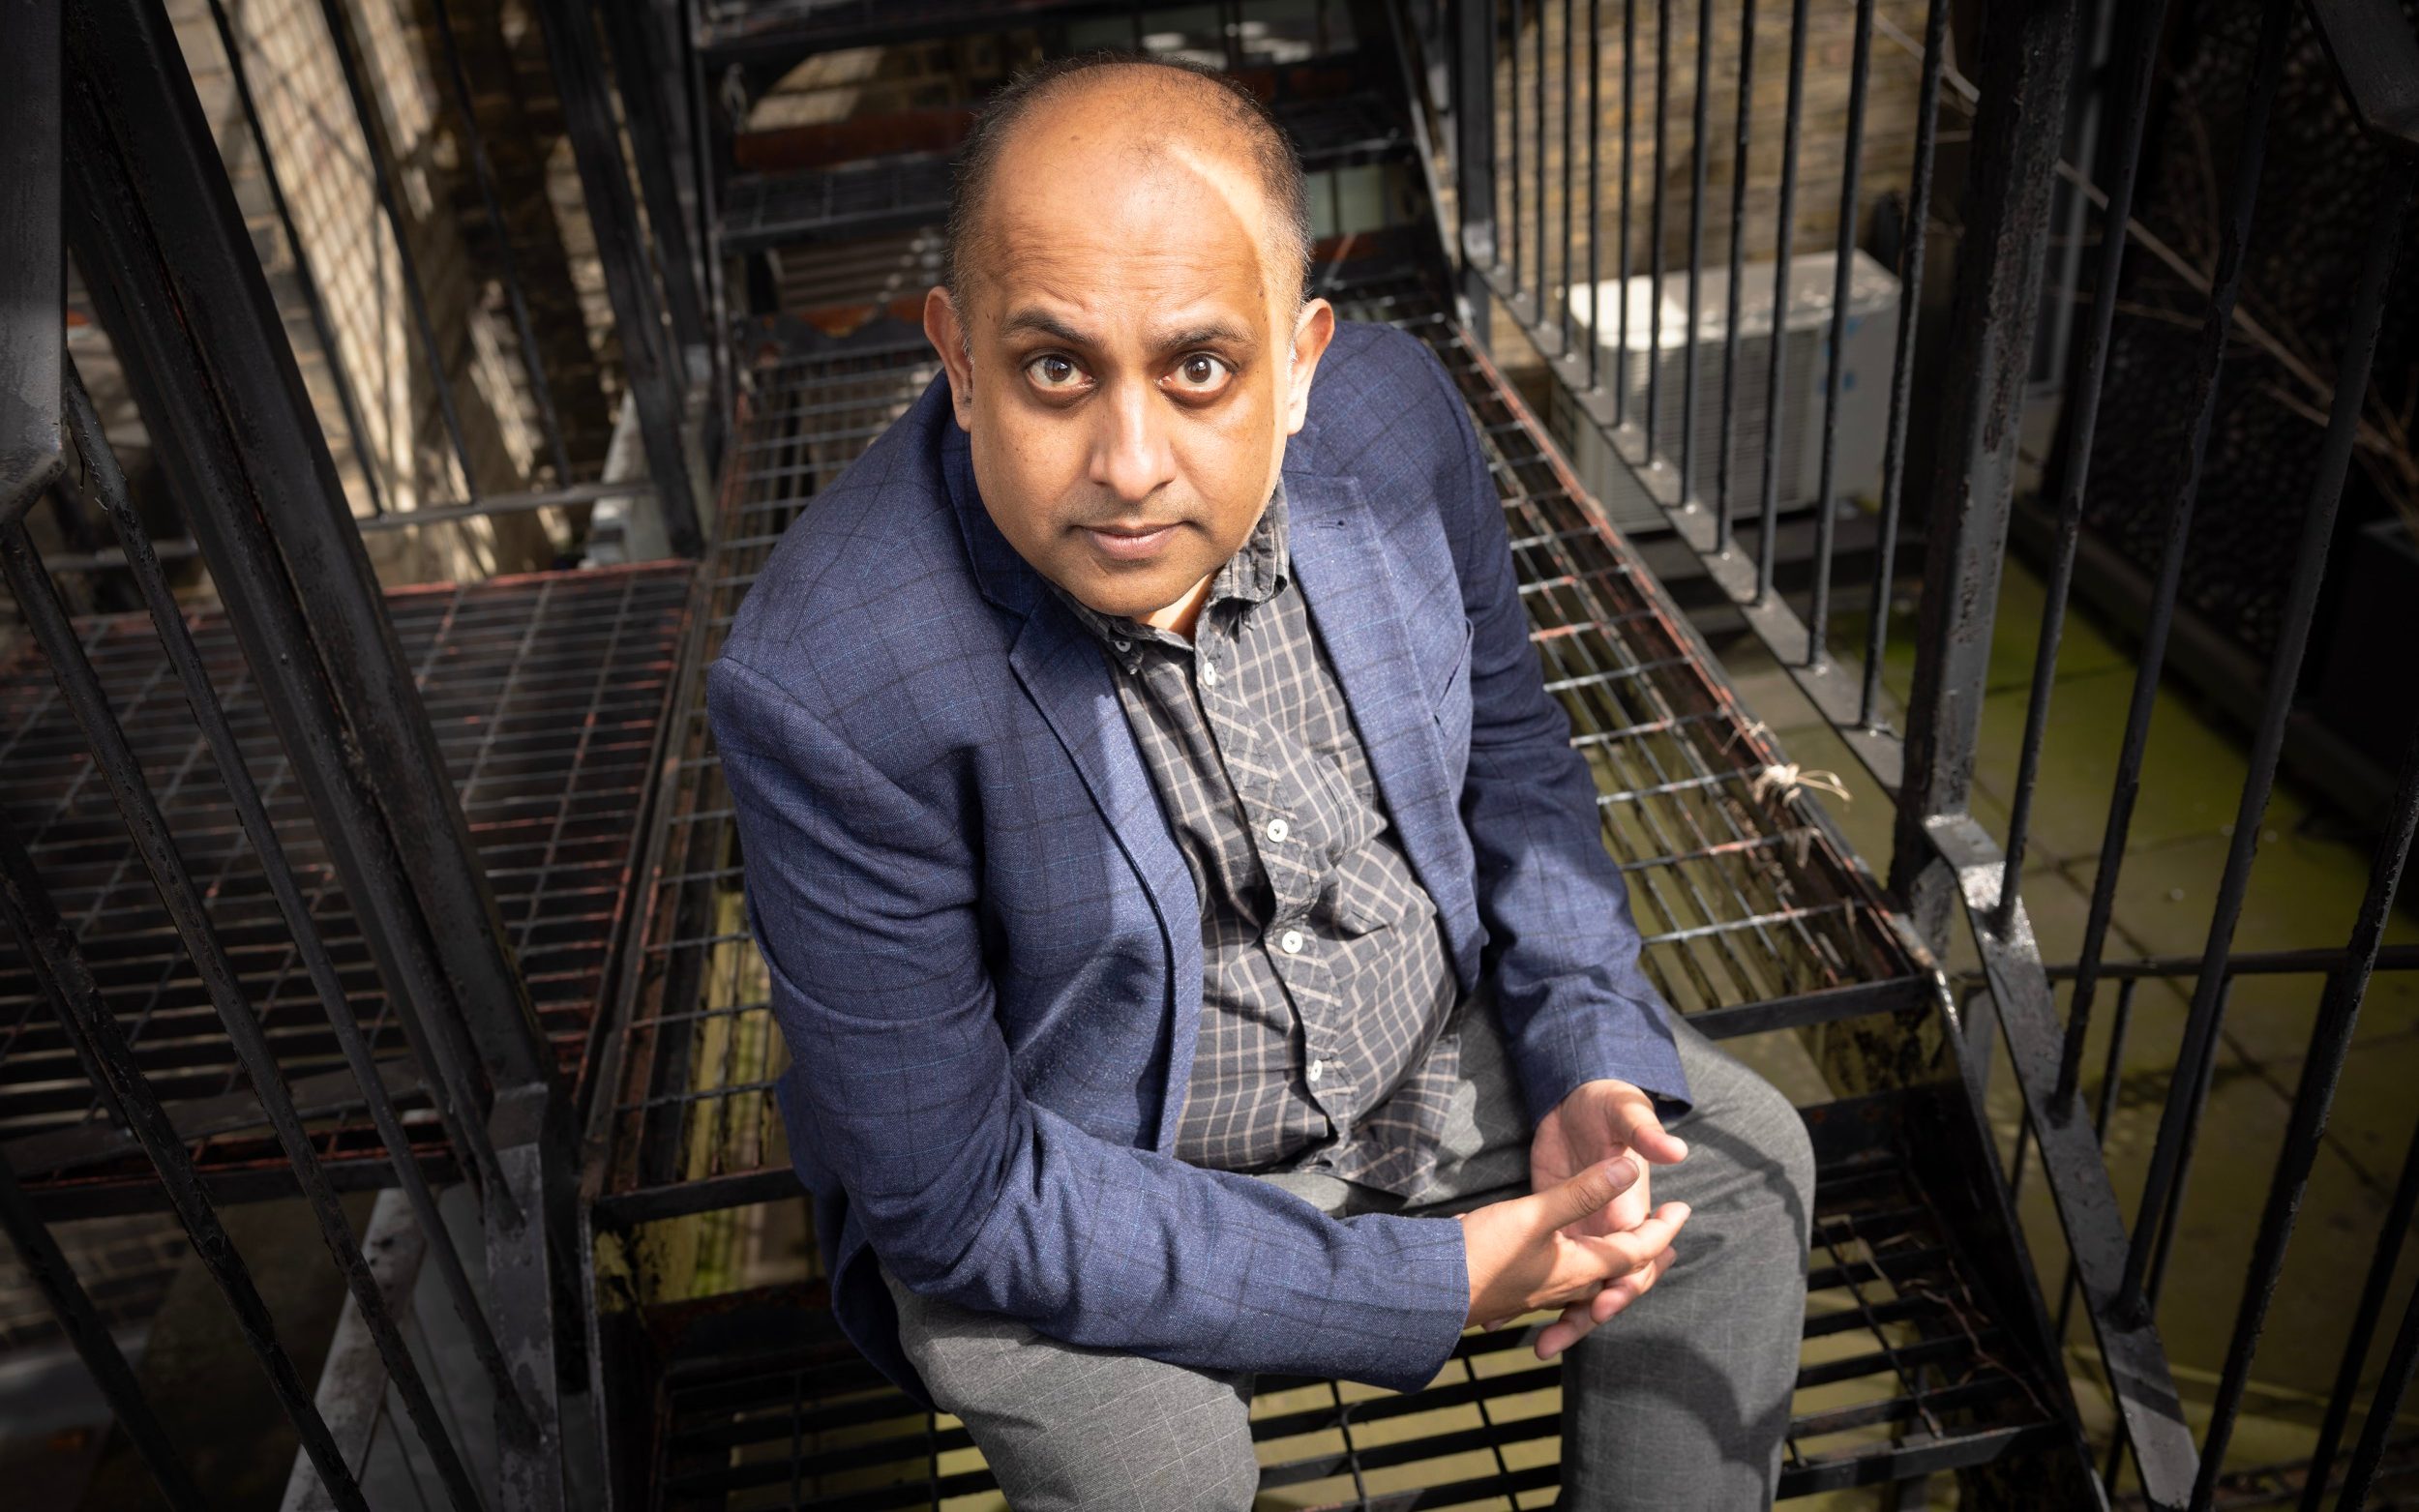 anuvab pal: ‘if a white comedian celebrated britishness, they’d be thought of as far-right’